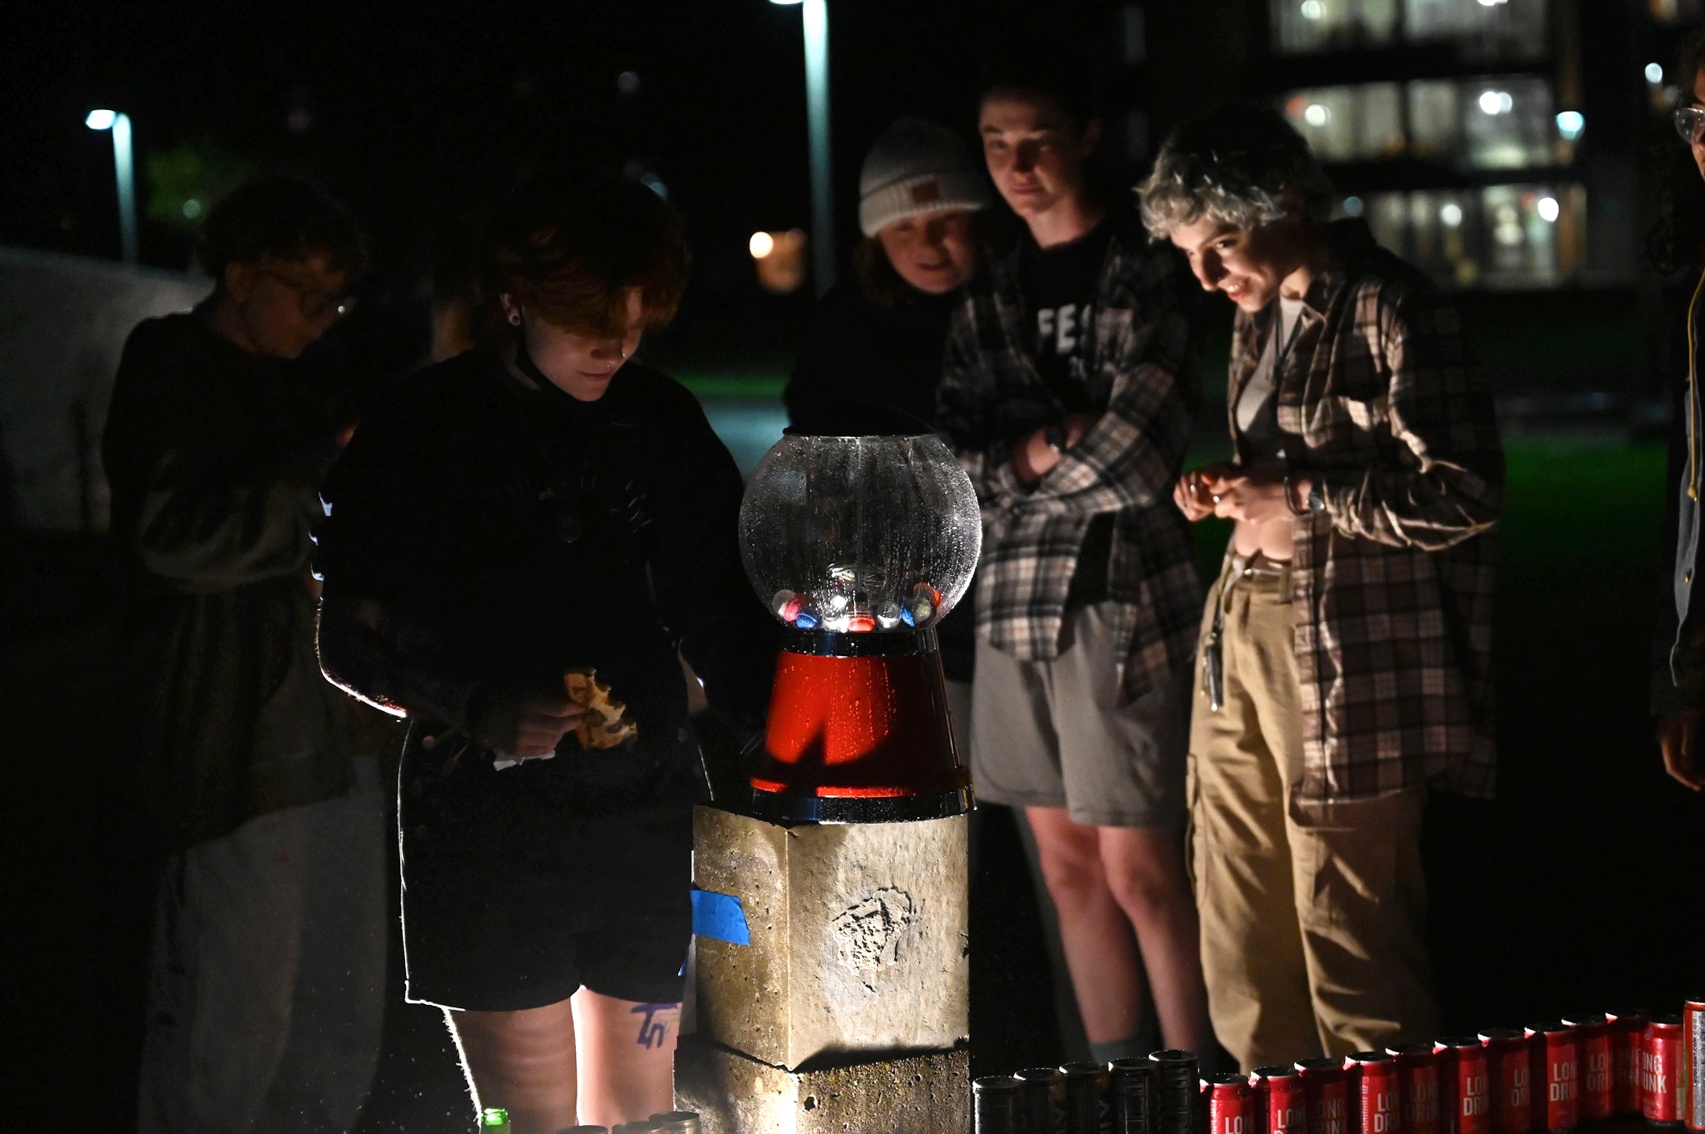 Outside at night, people gather around a gum ball machine.